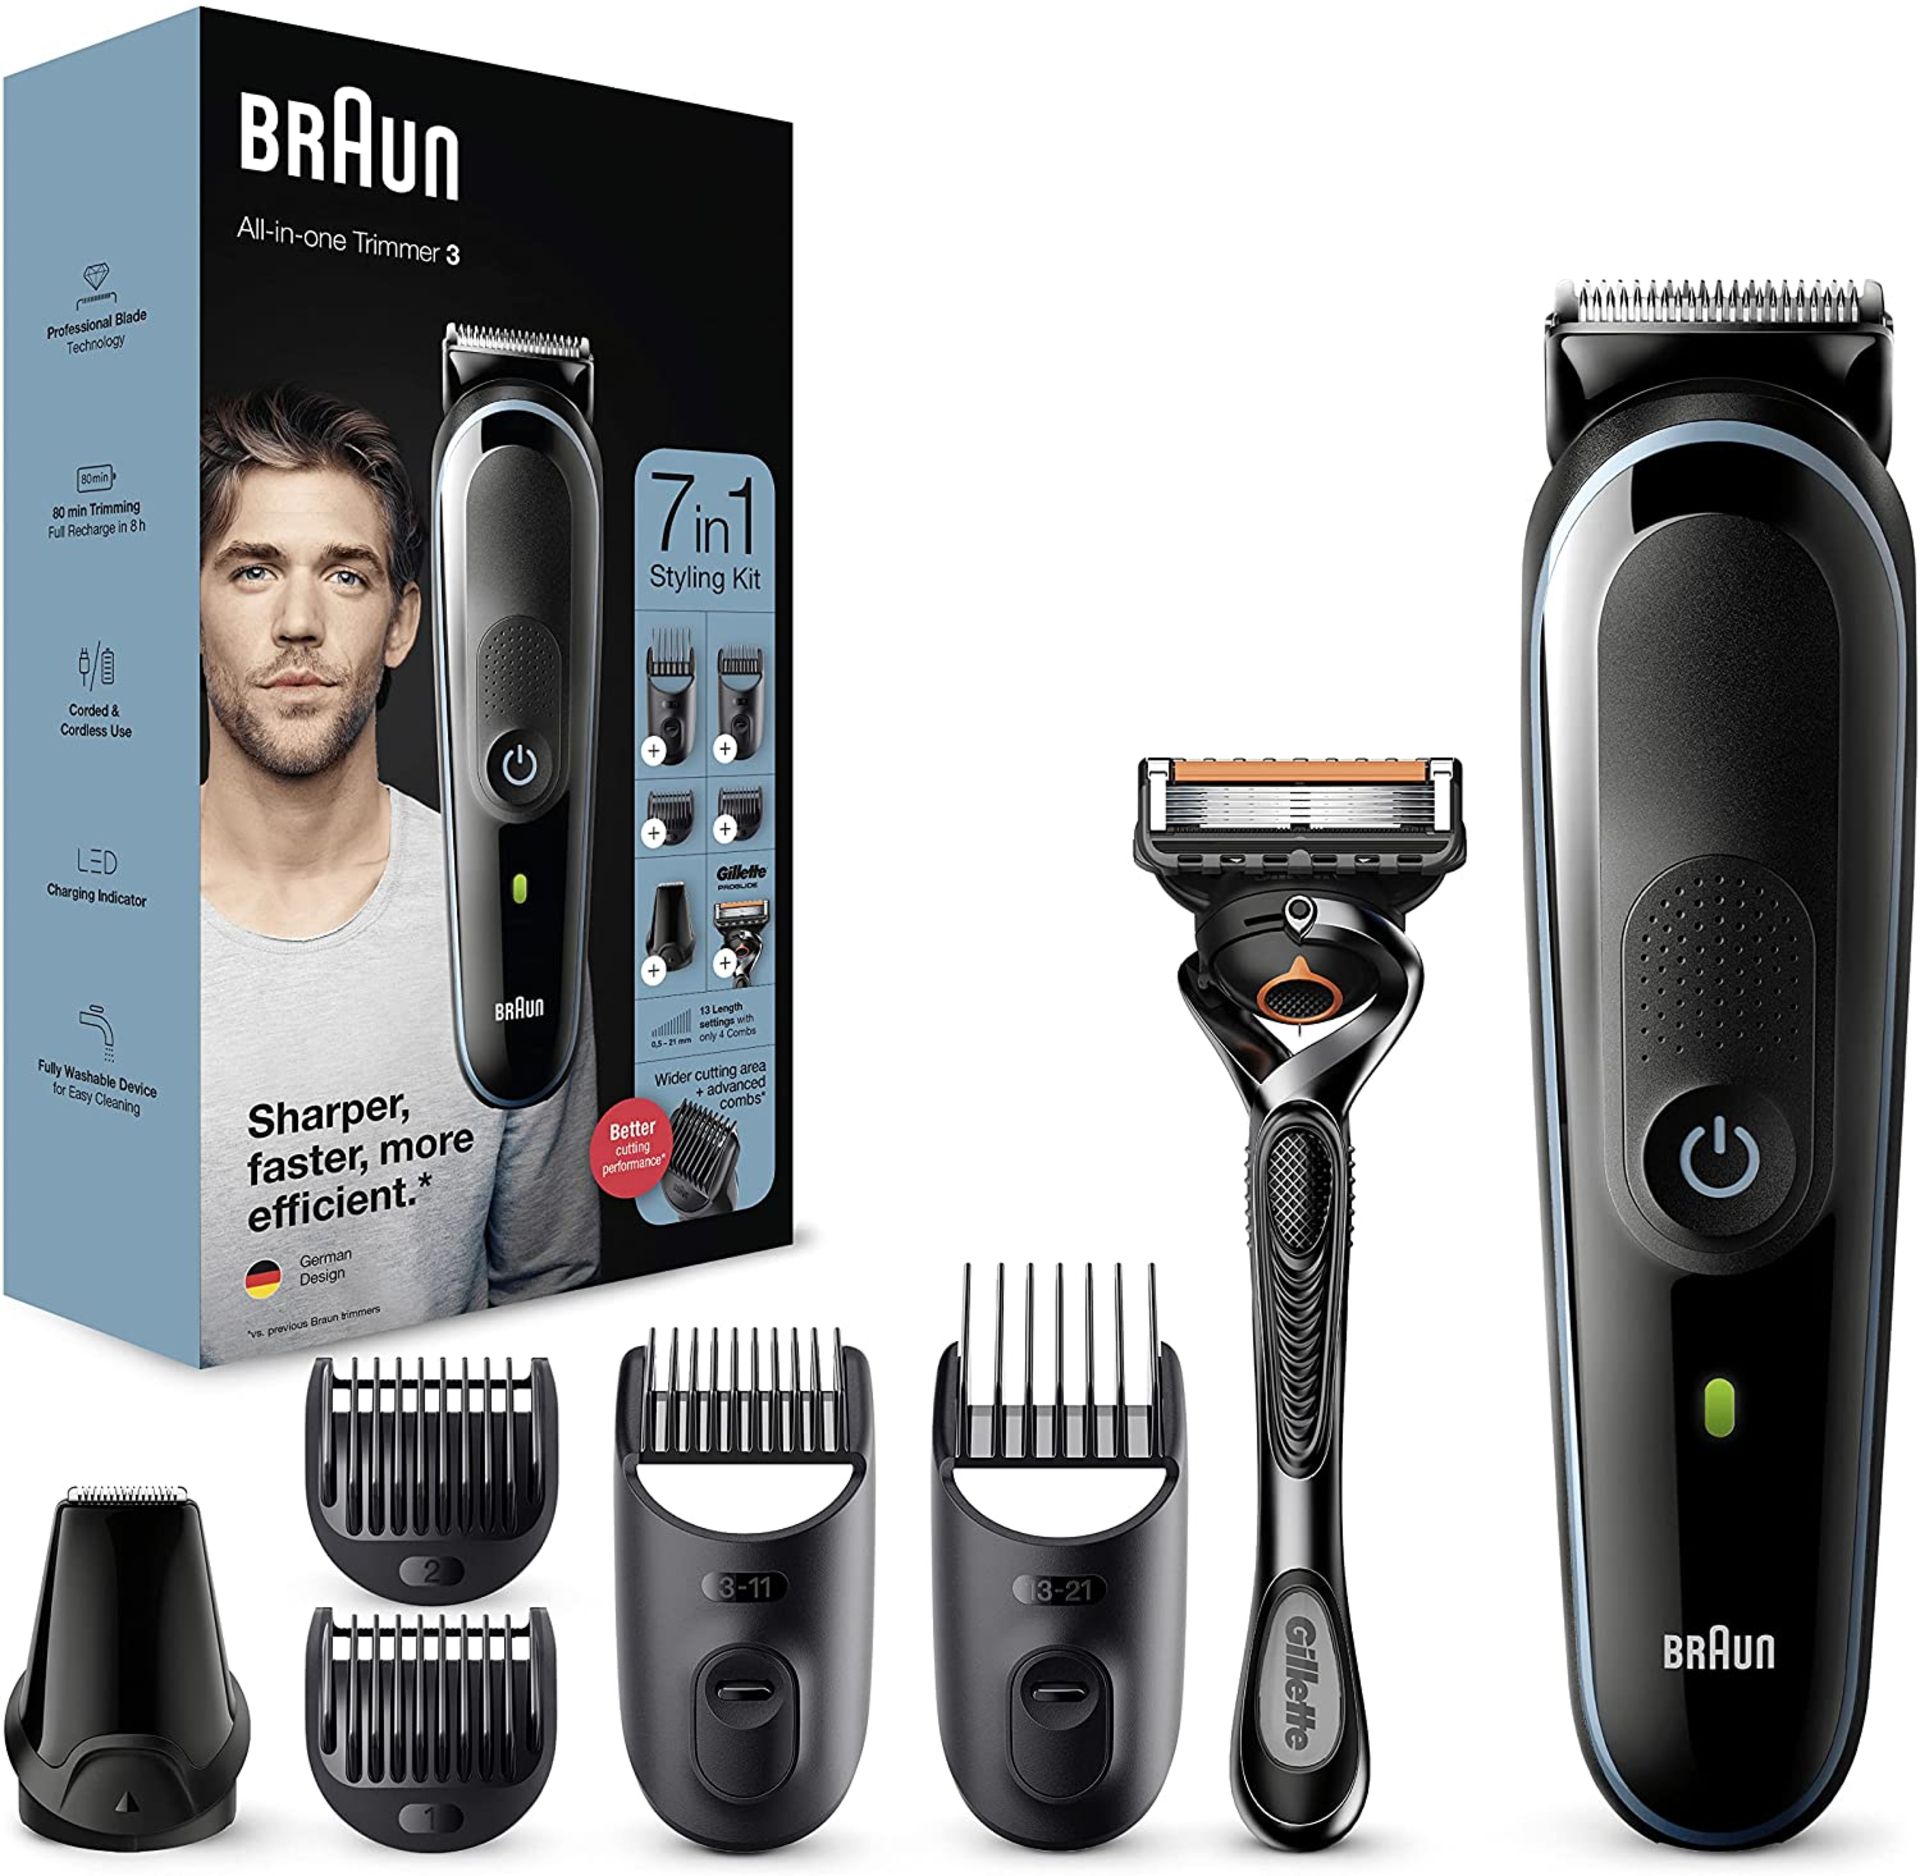 Braun 7-in-1 All-in-one Trimmer 3 MGK3245, Beard Trimmer for Men, Hair Clipper and Face Trimmer with